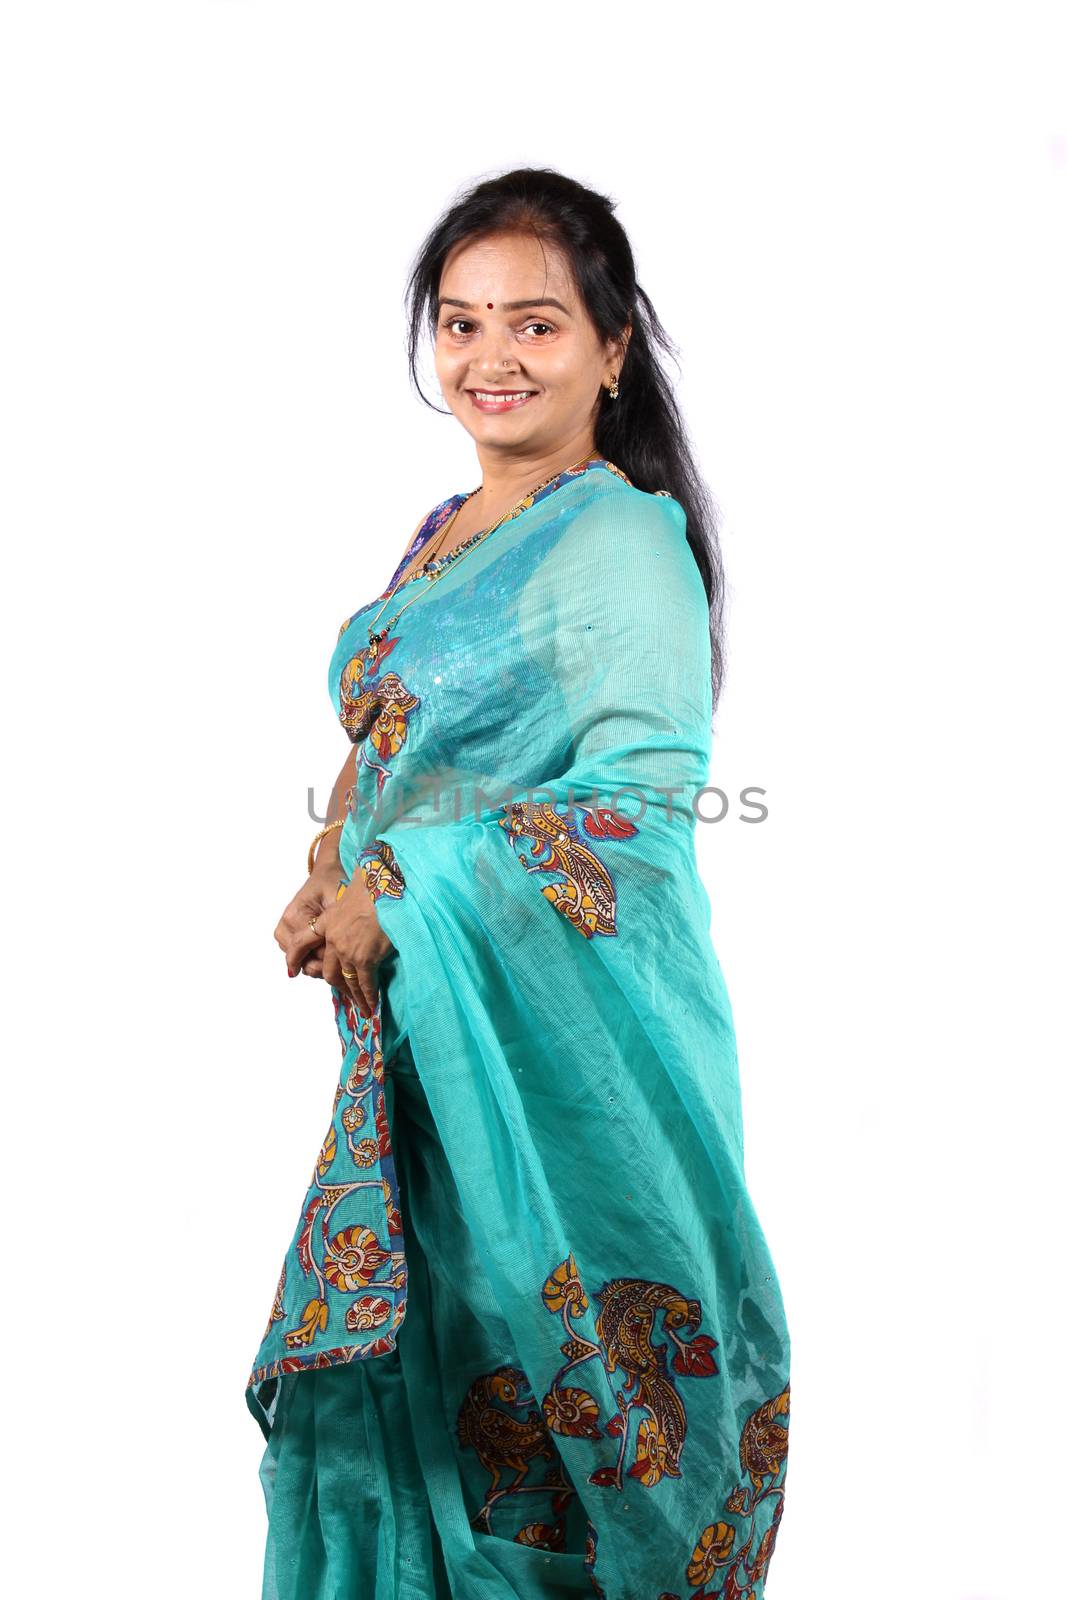 A beautiful Indian woman in a traditional saree, on a white studio background.